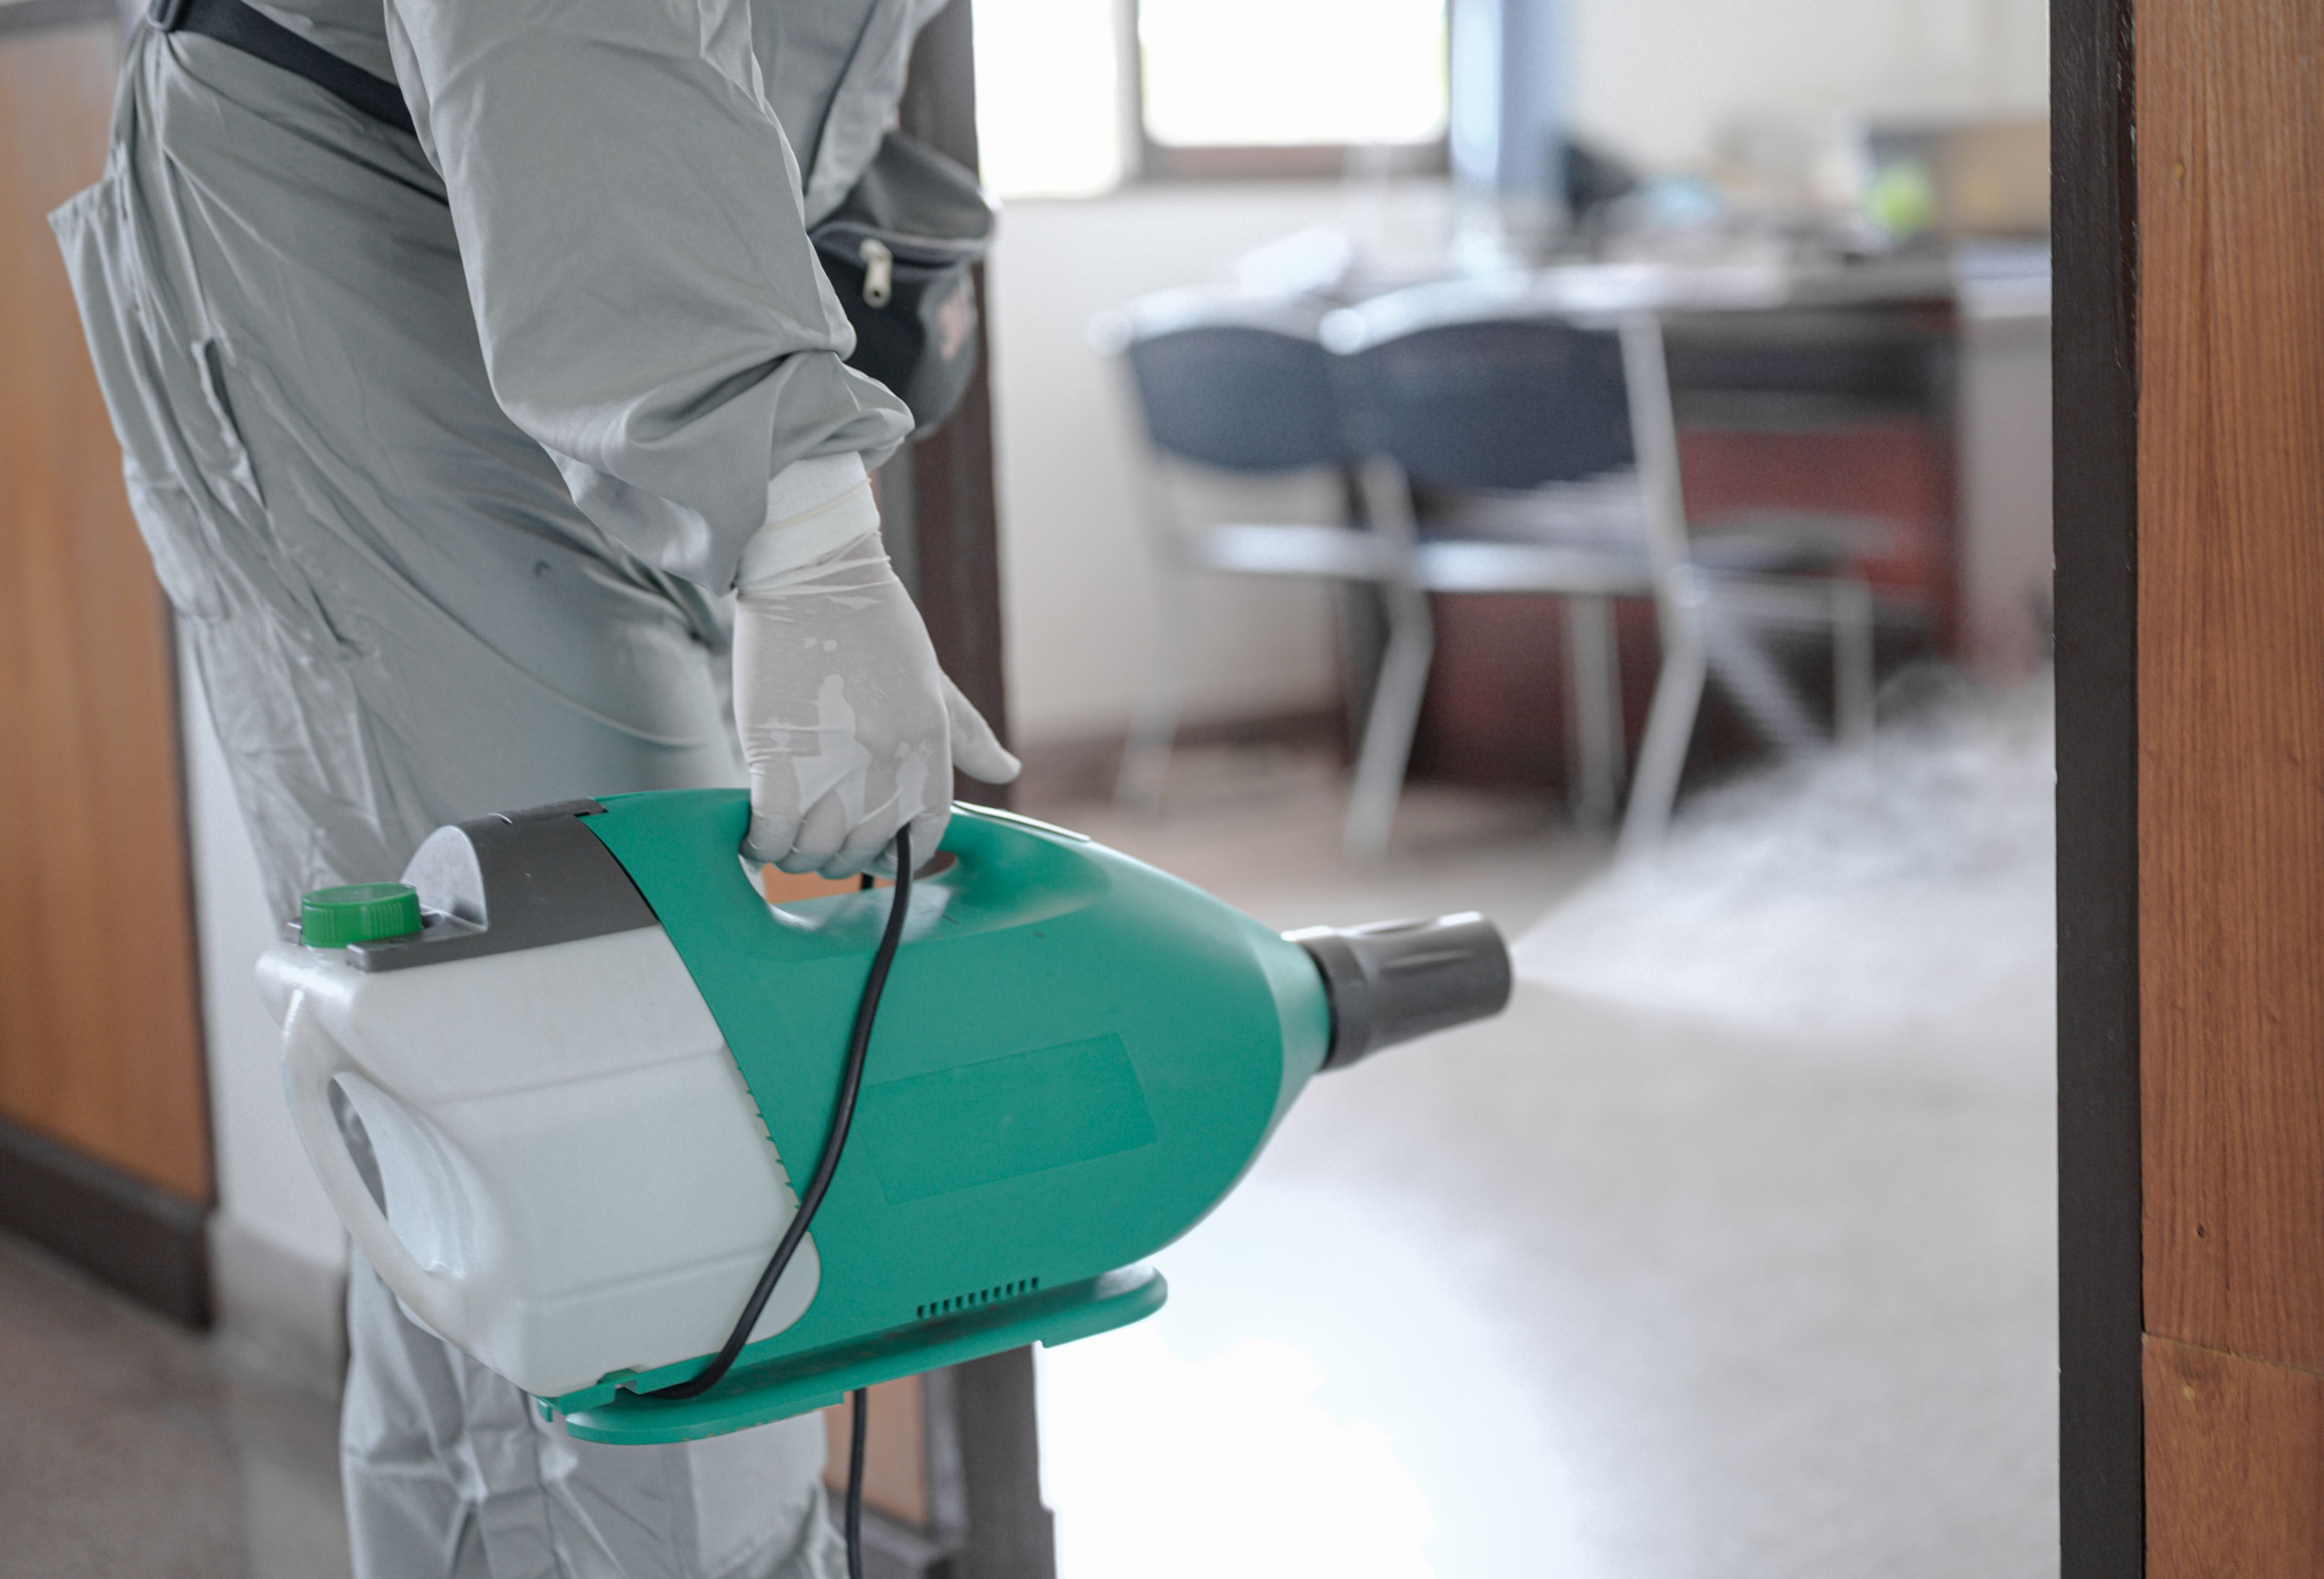 Find Deep Cleaning Disinfecting Service